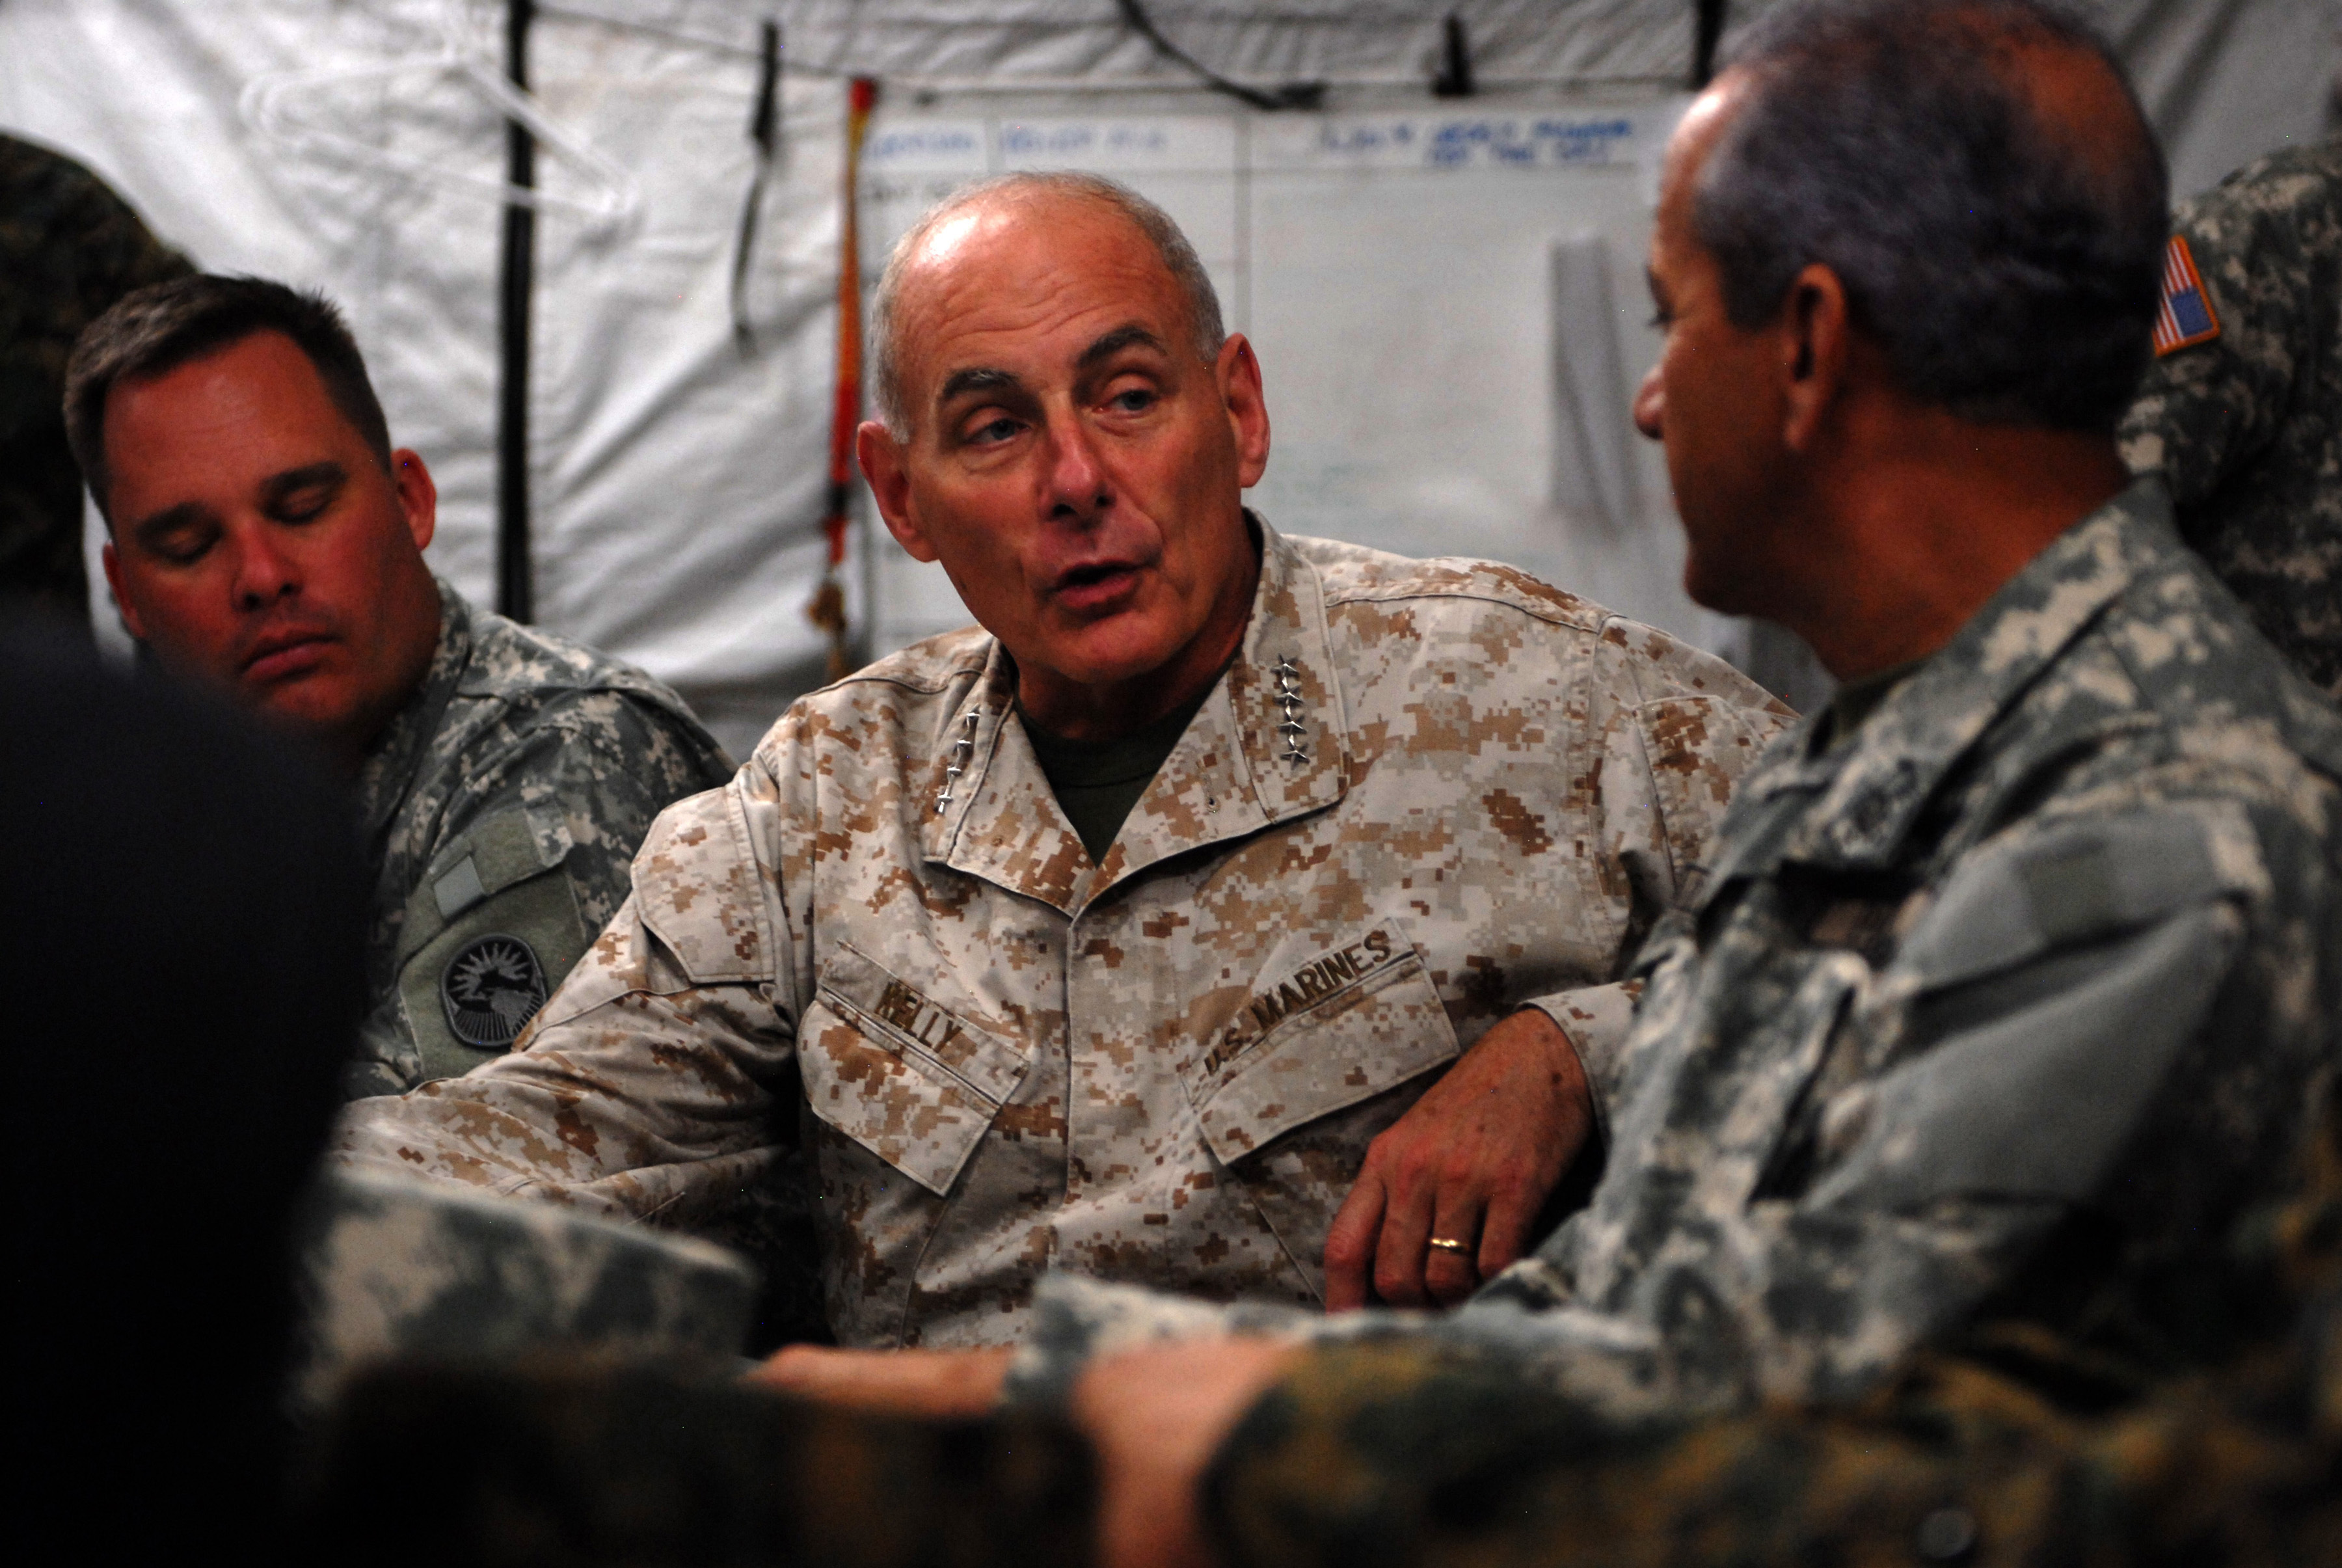 Marine Corps Gen. John F. Kelly, center, commander of U.S. Southern Command, speaks with Adm. Sigifrido Pared Perez, Dominican Republic minister of defense, in Barahona, Dominican Republic on June 9, 2014. SOUTHCOM Photo